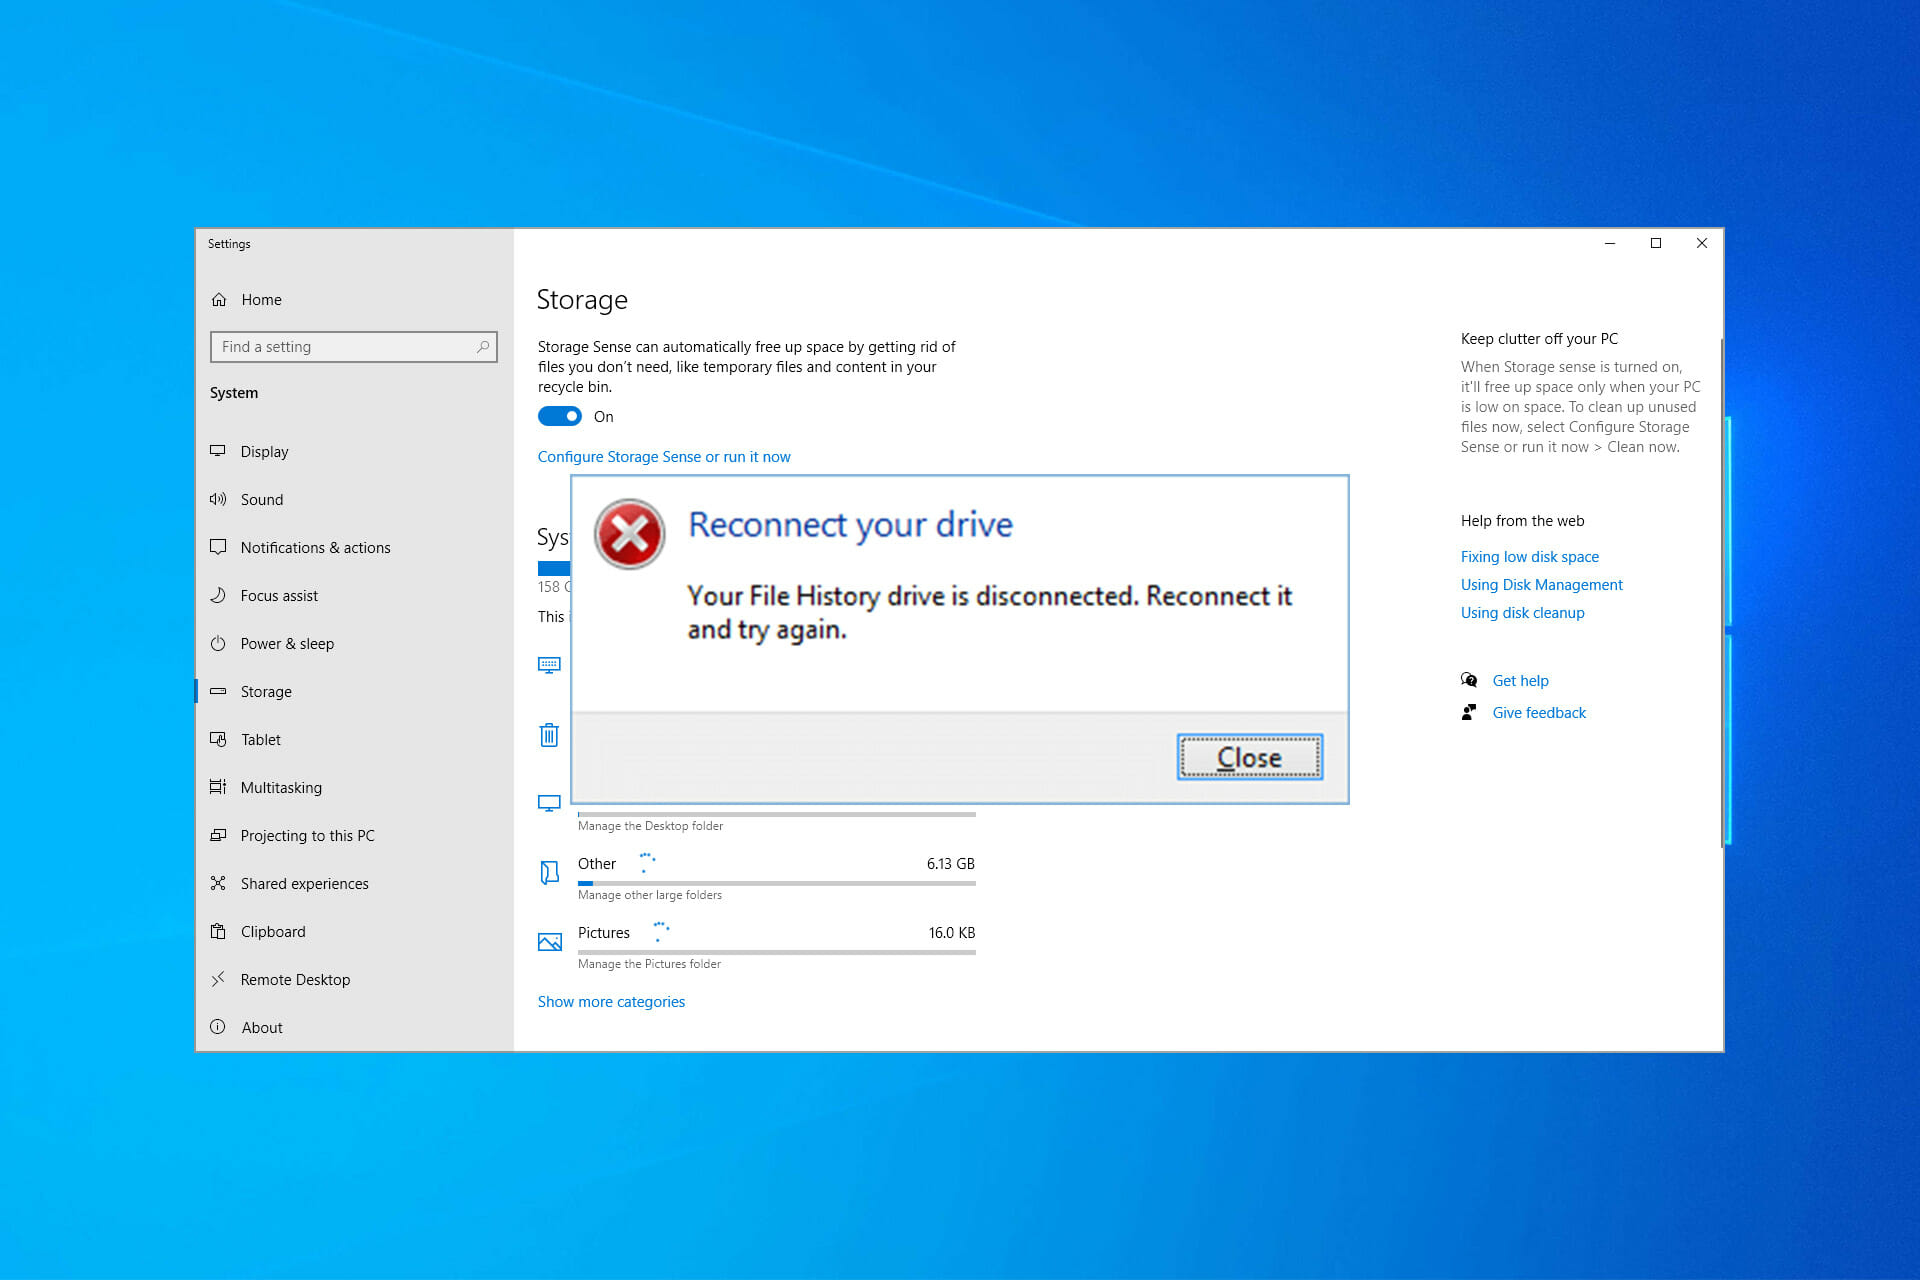 reconnect your drive windows 10 11